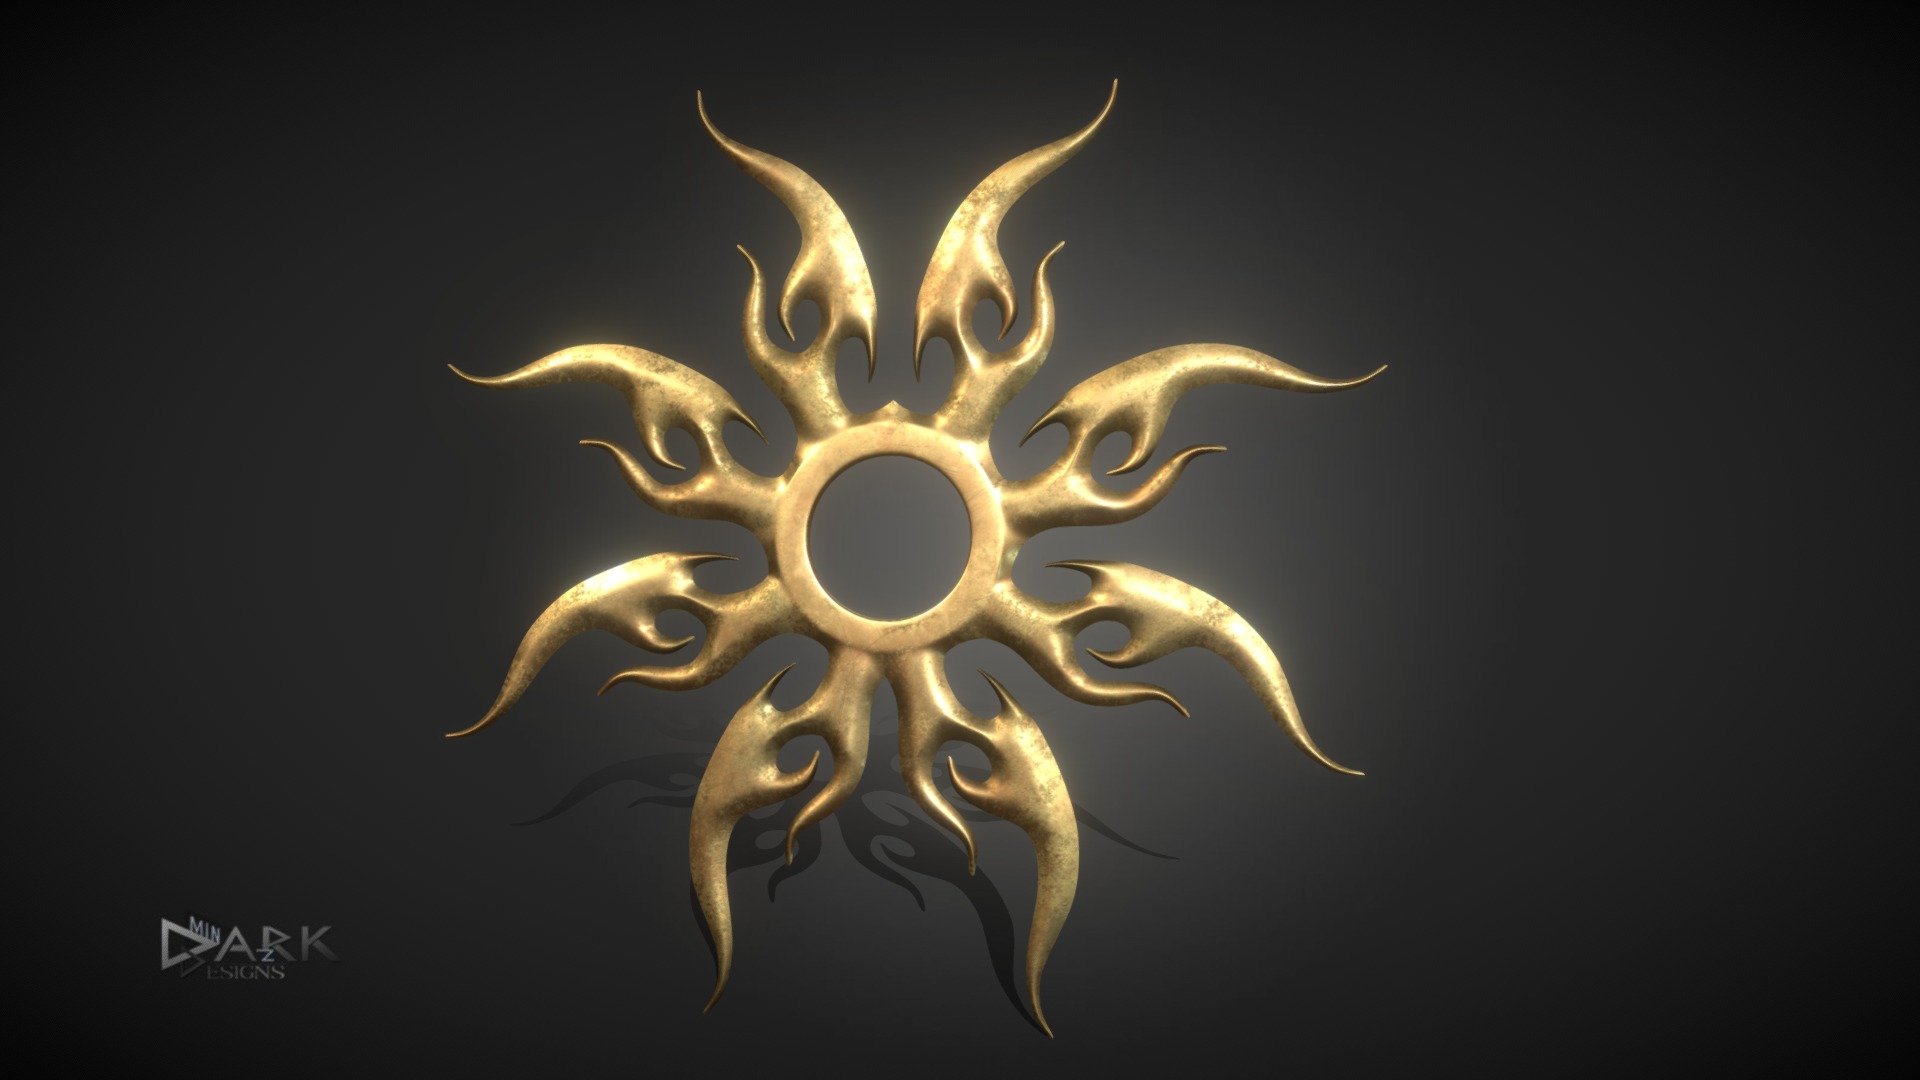 A shiny little piece of Jewelry to praise the Sun in the darkest days.

Made as speed modeling test in maya, 3dcoat and substance painter - Sun Jewelry - 3D model by dark-minaz 3d model